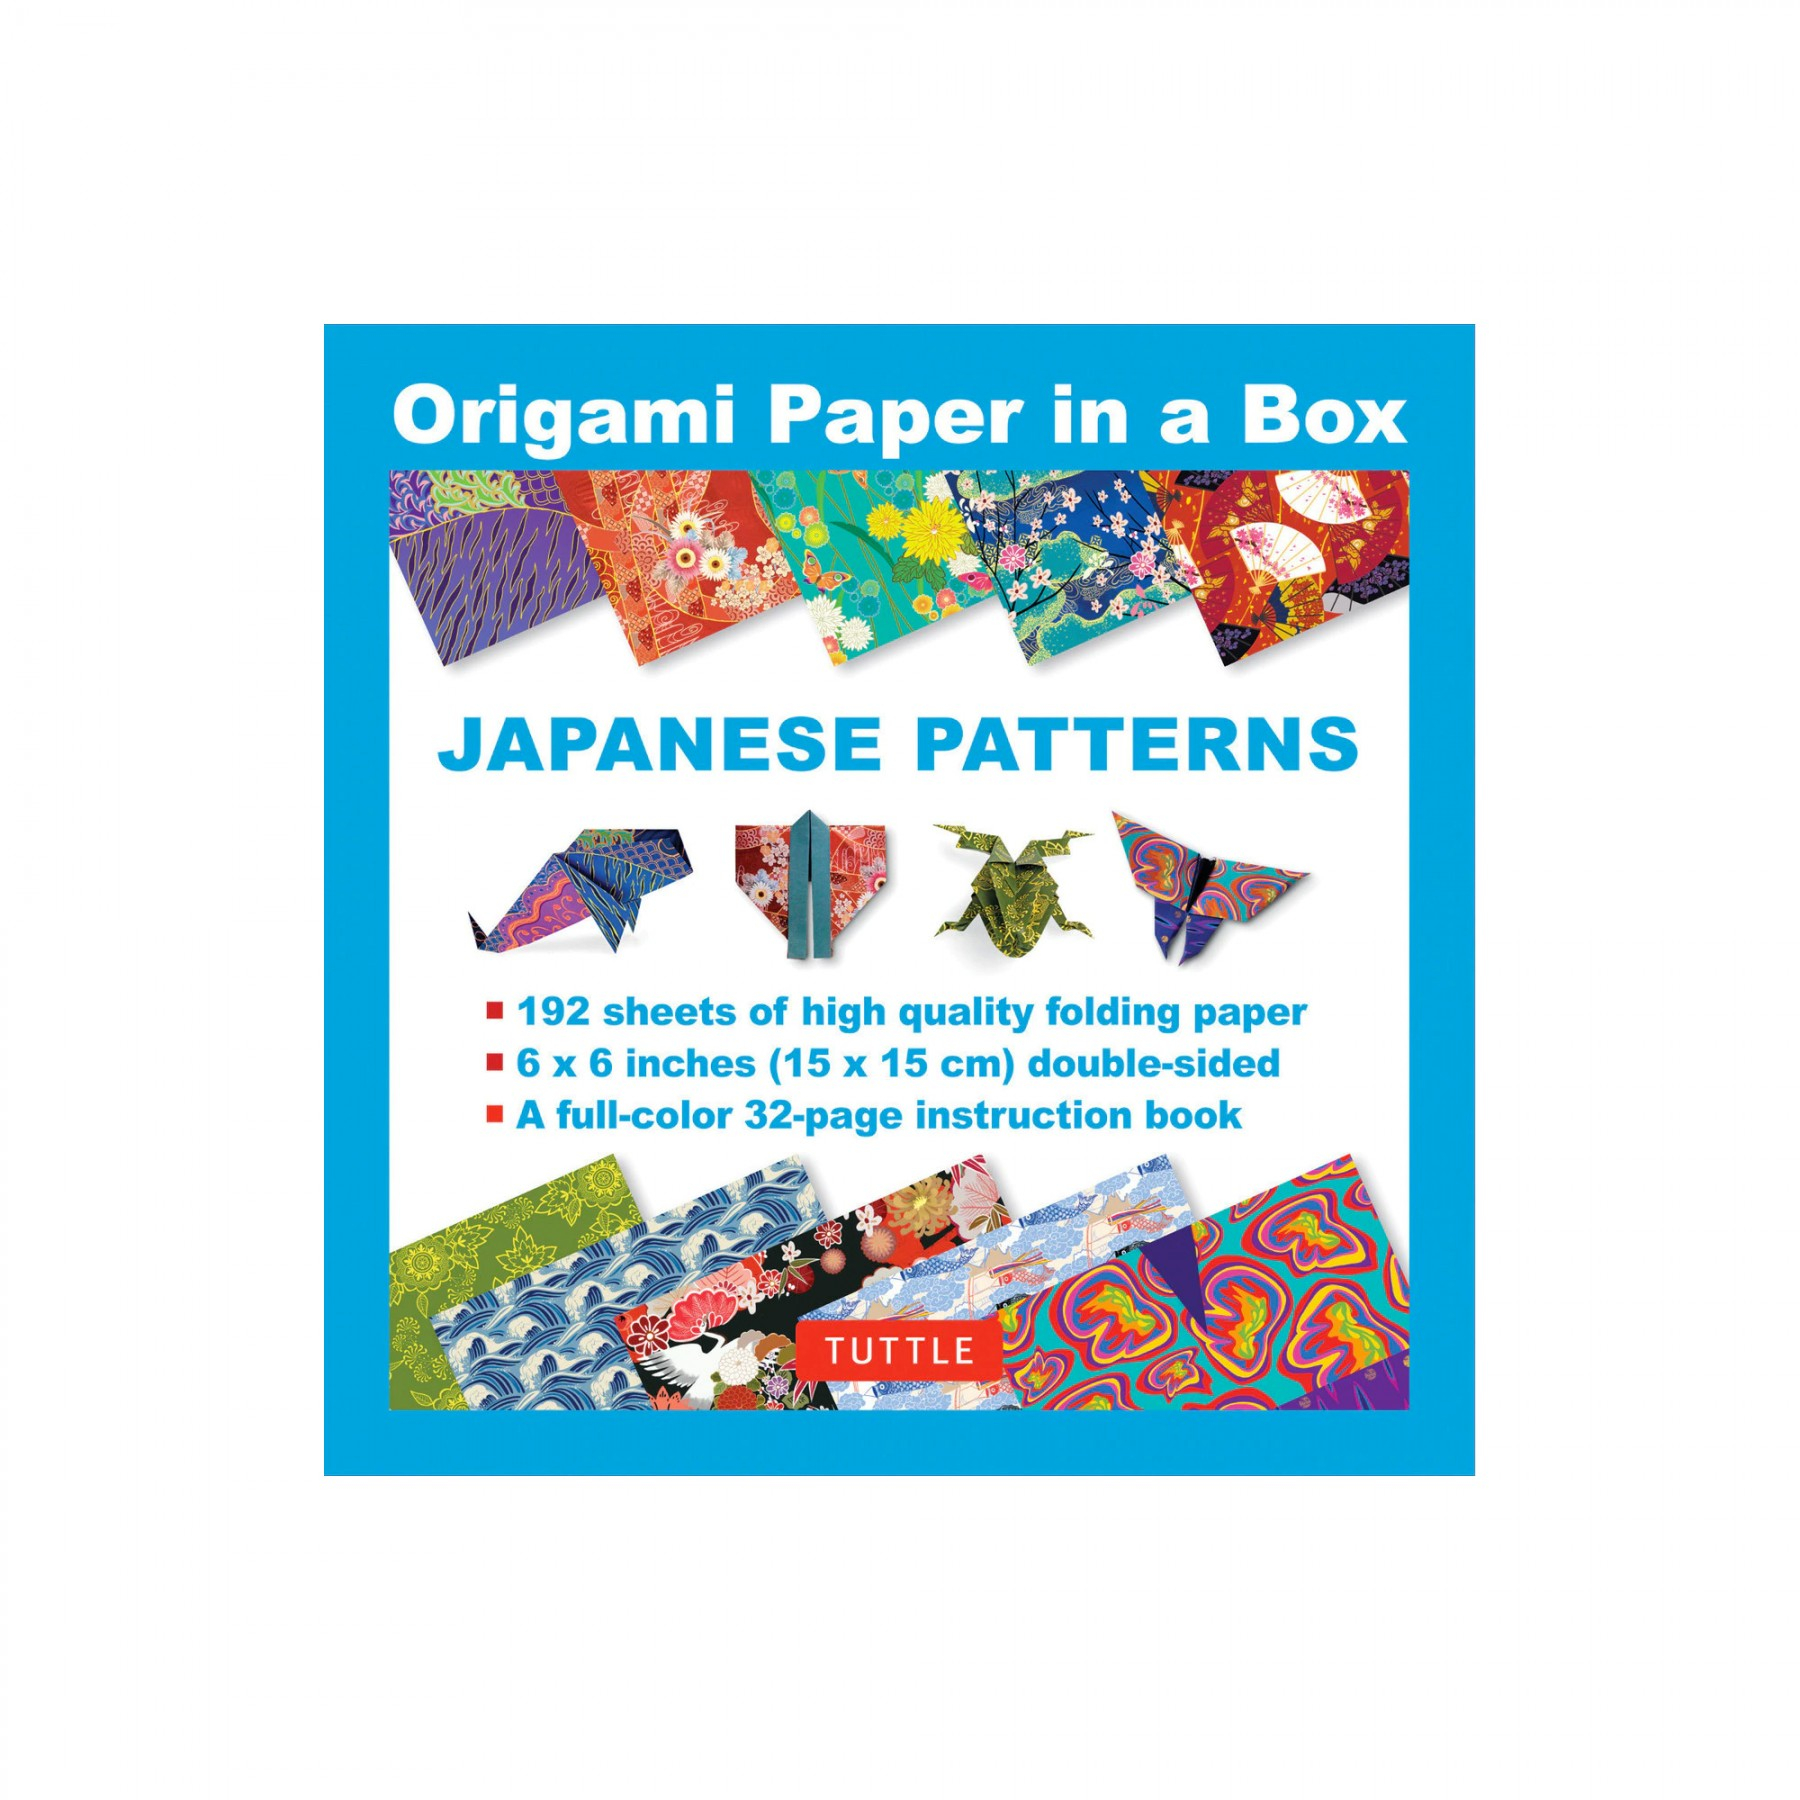 Origami Paper Box Origami Paper In A Box Japanese Patterns